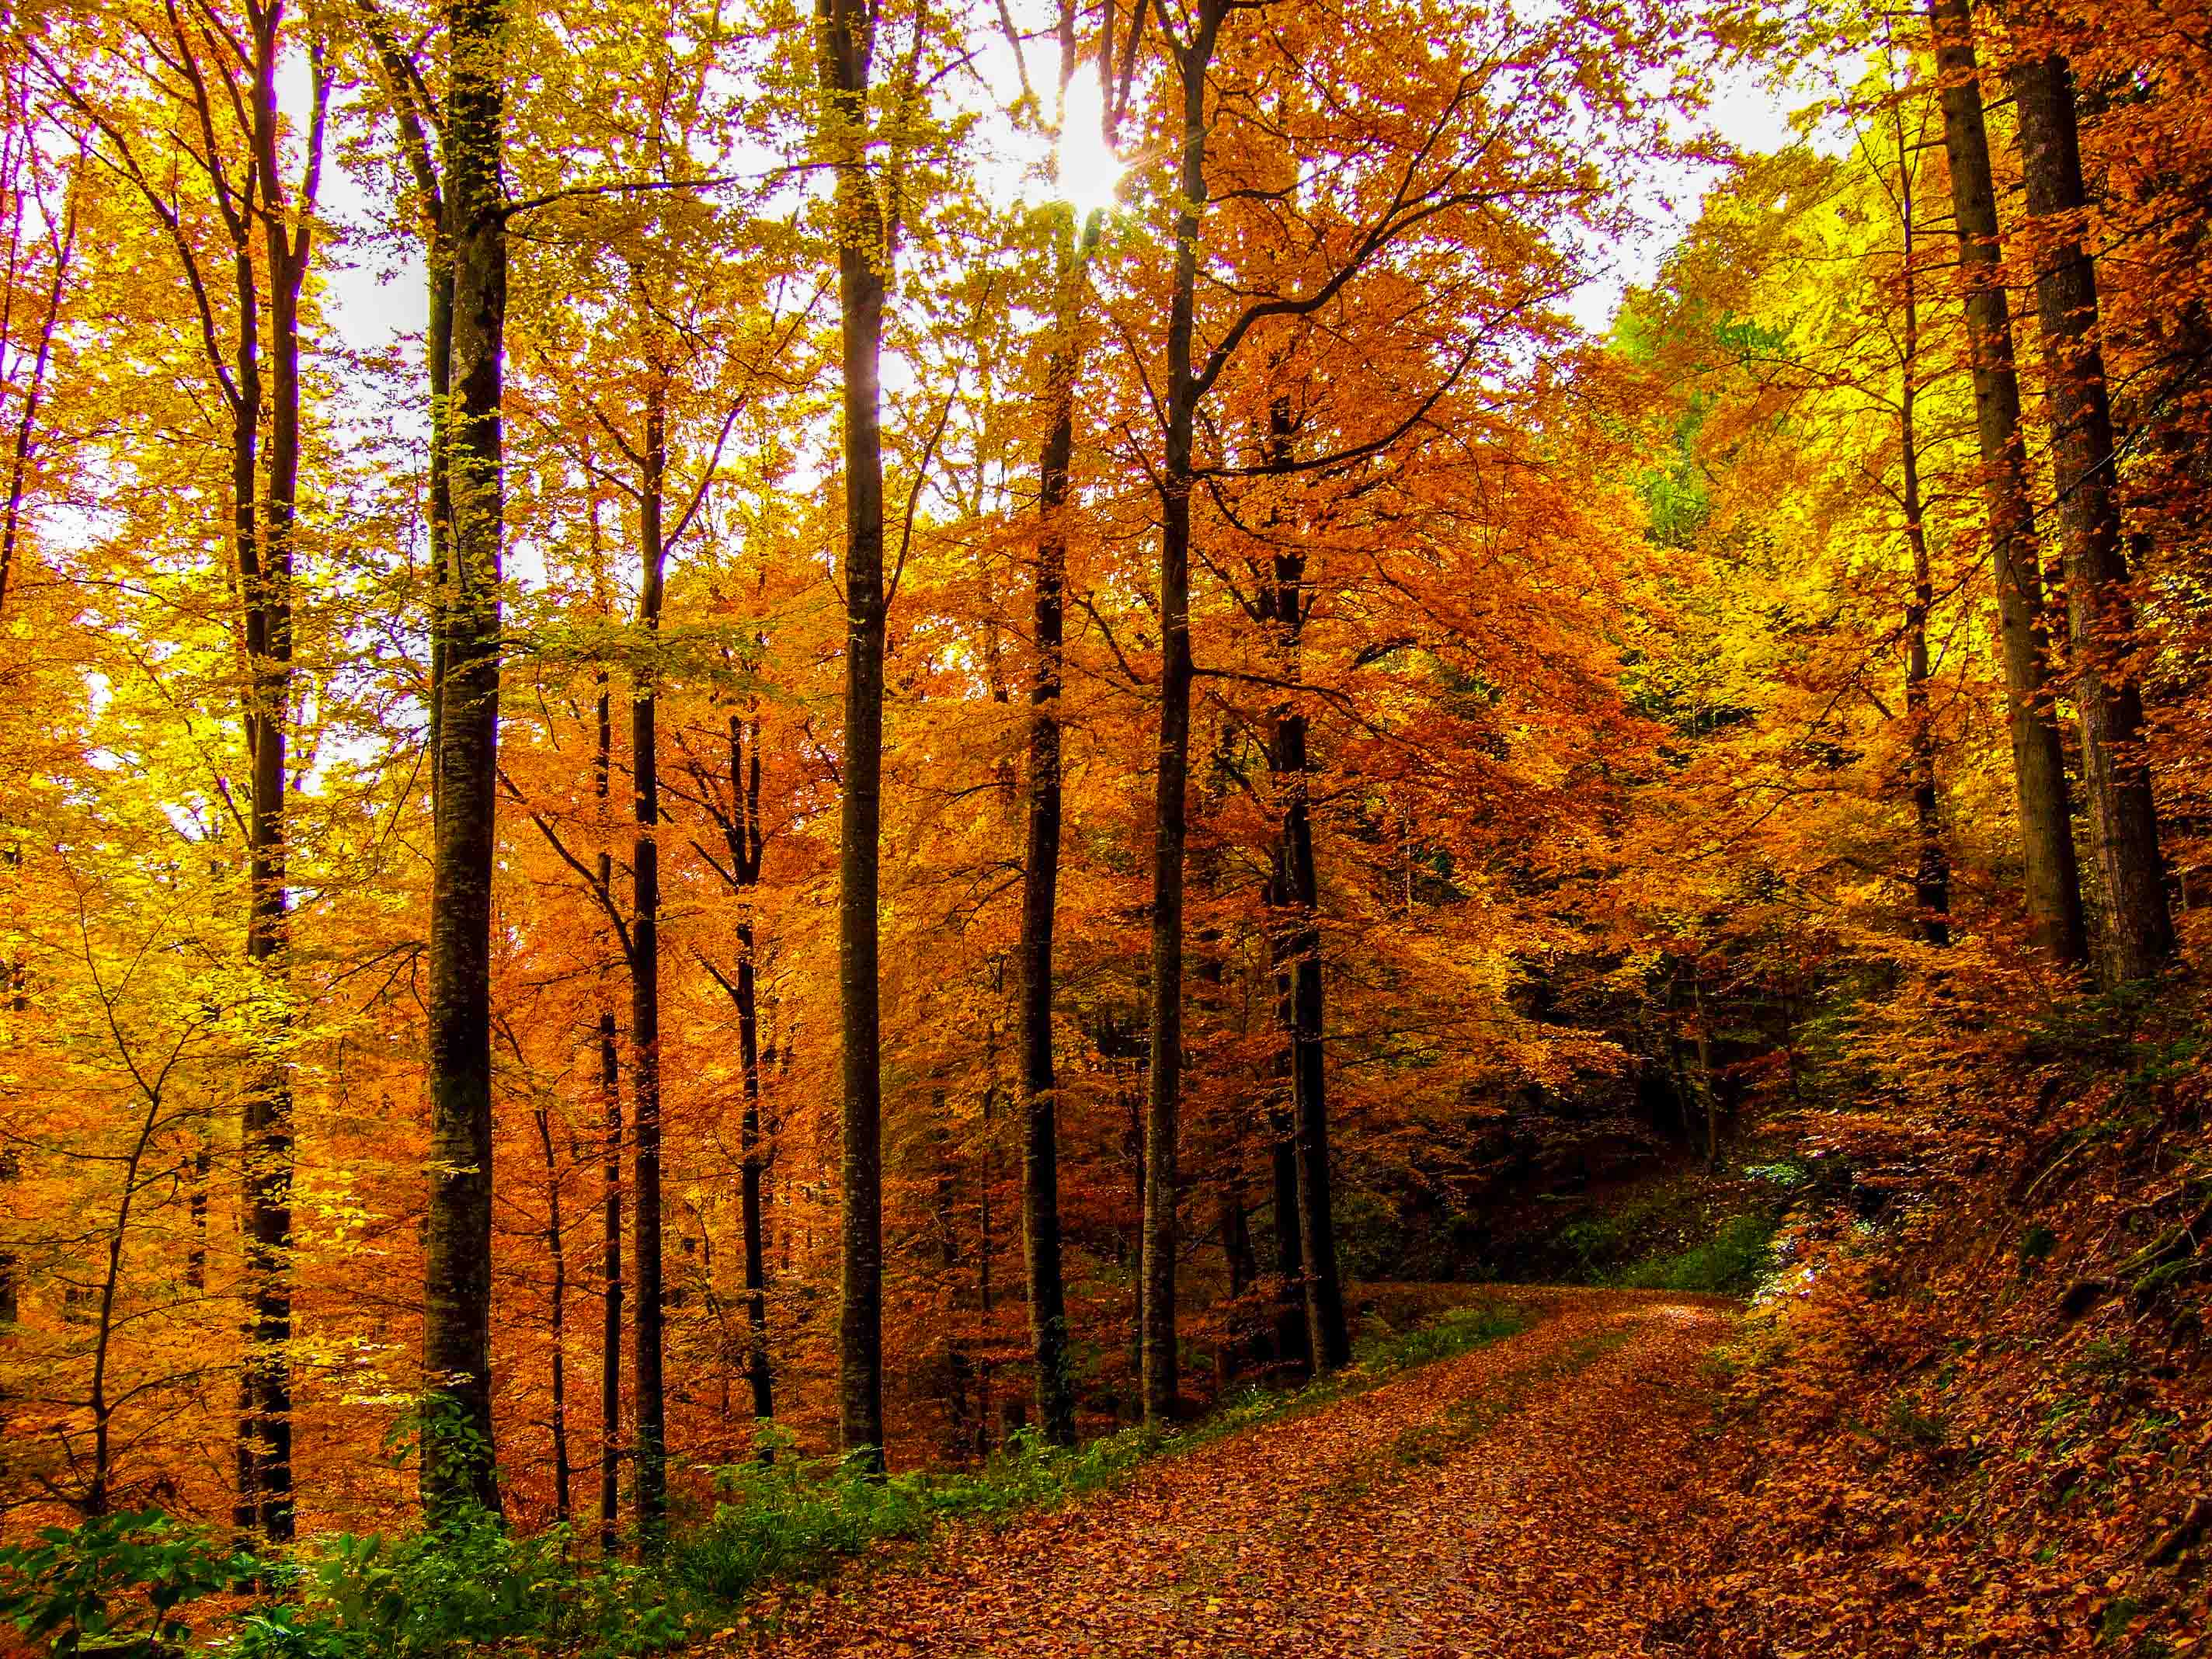 Fall colors in the Black Forest | On A Day Like Today